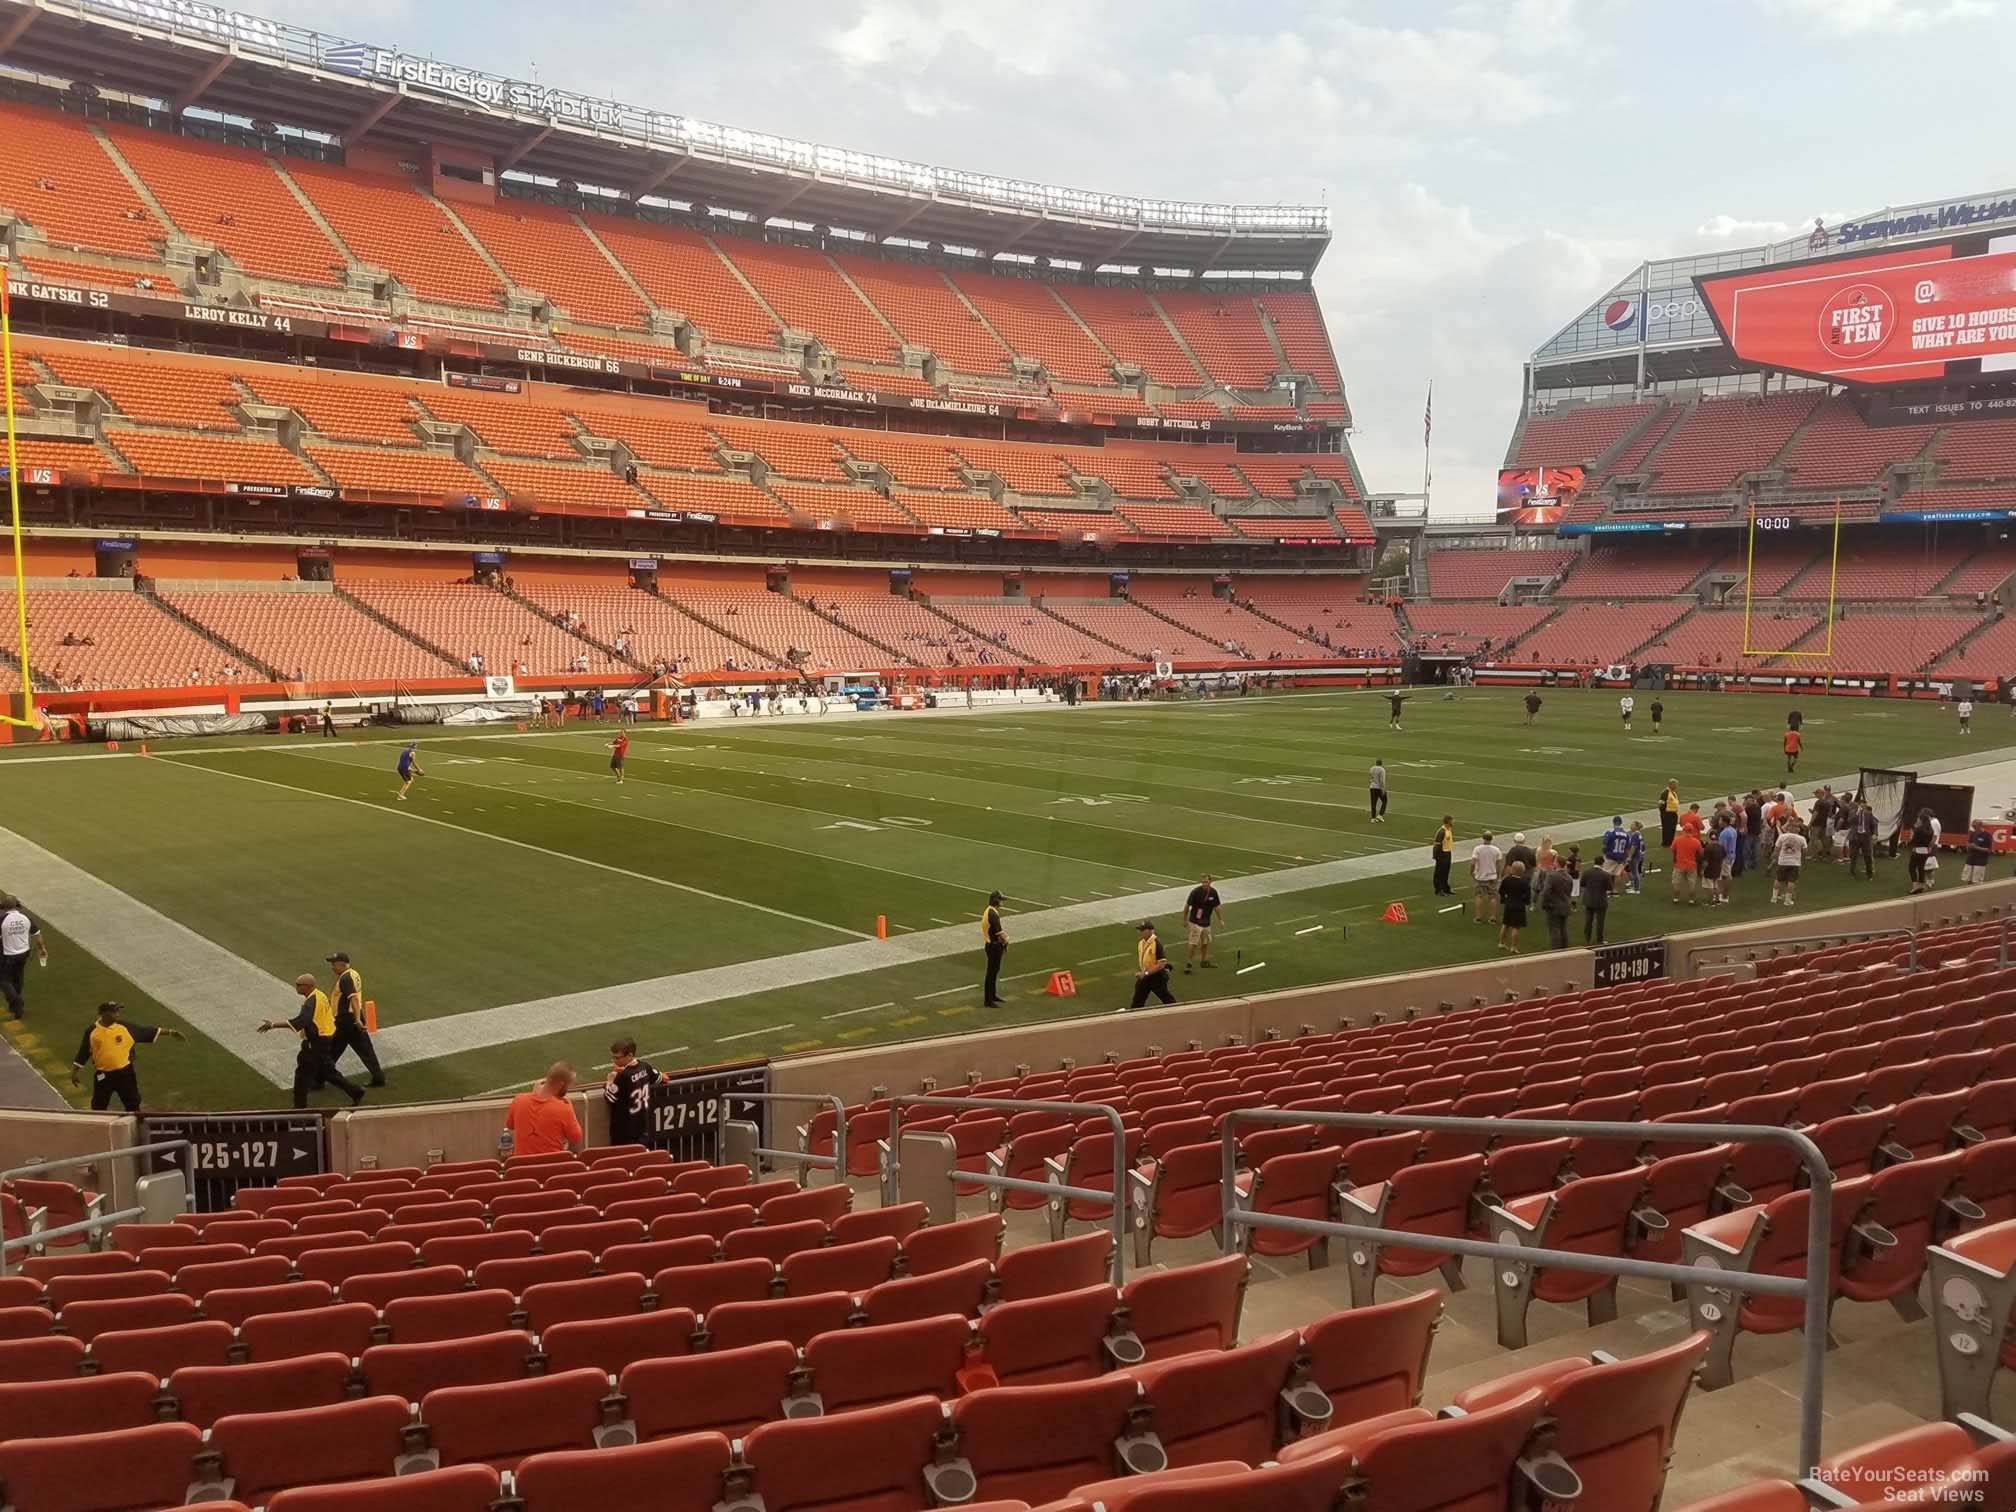 section 127, row 17 seat view  - cleveland browns stadium